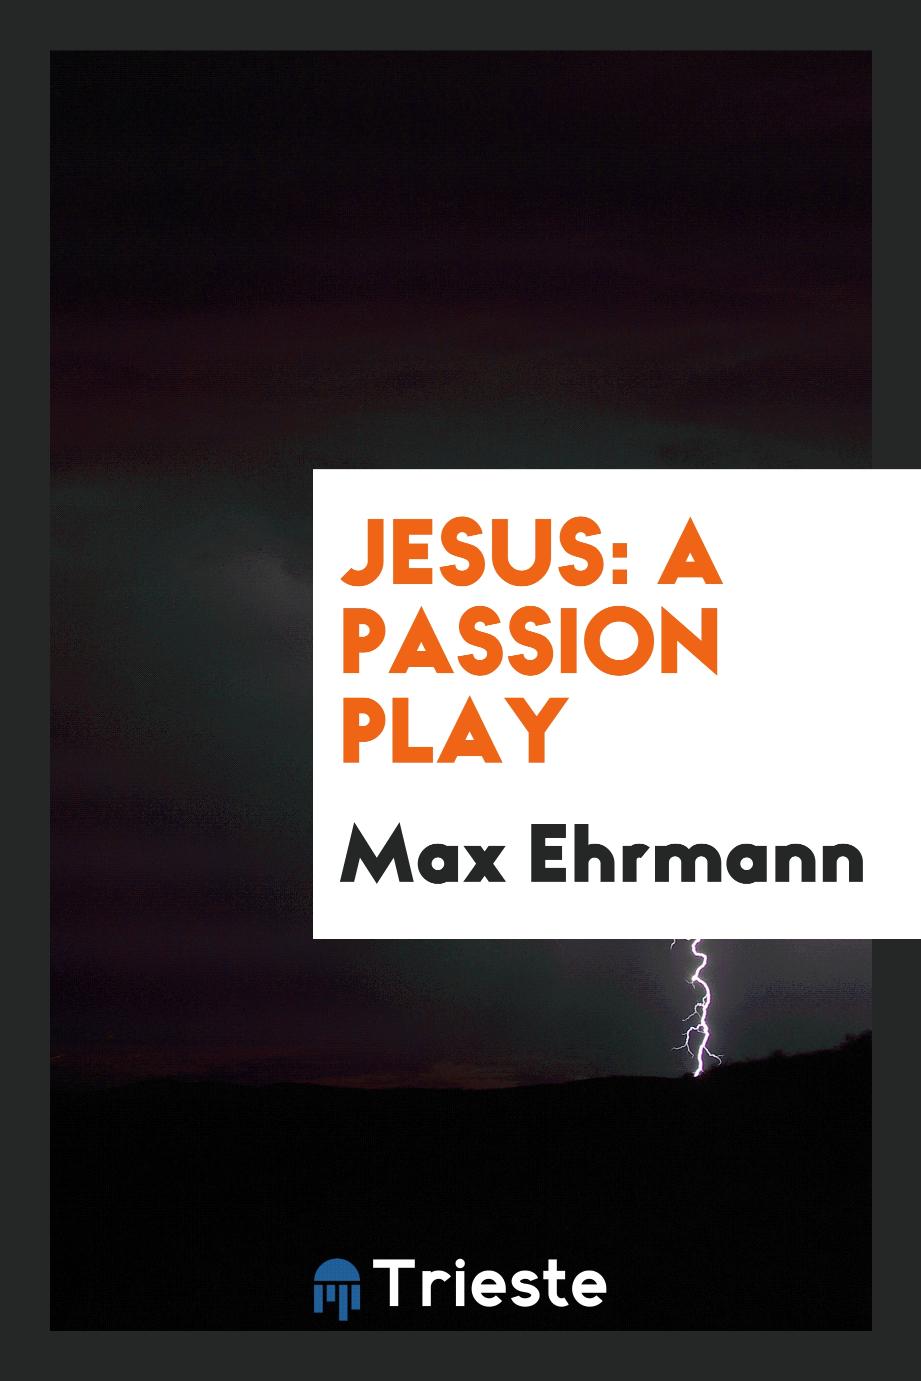 Jesus: a passion play